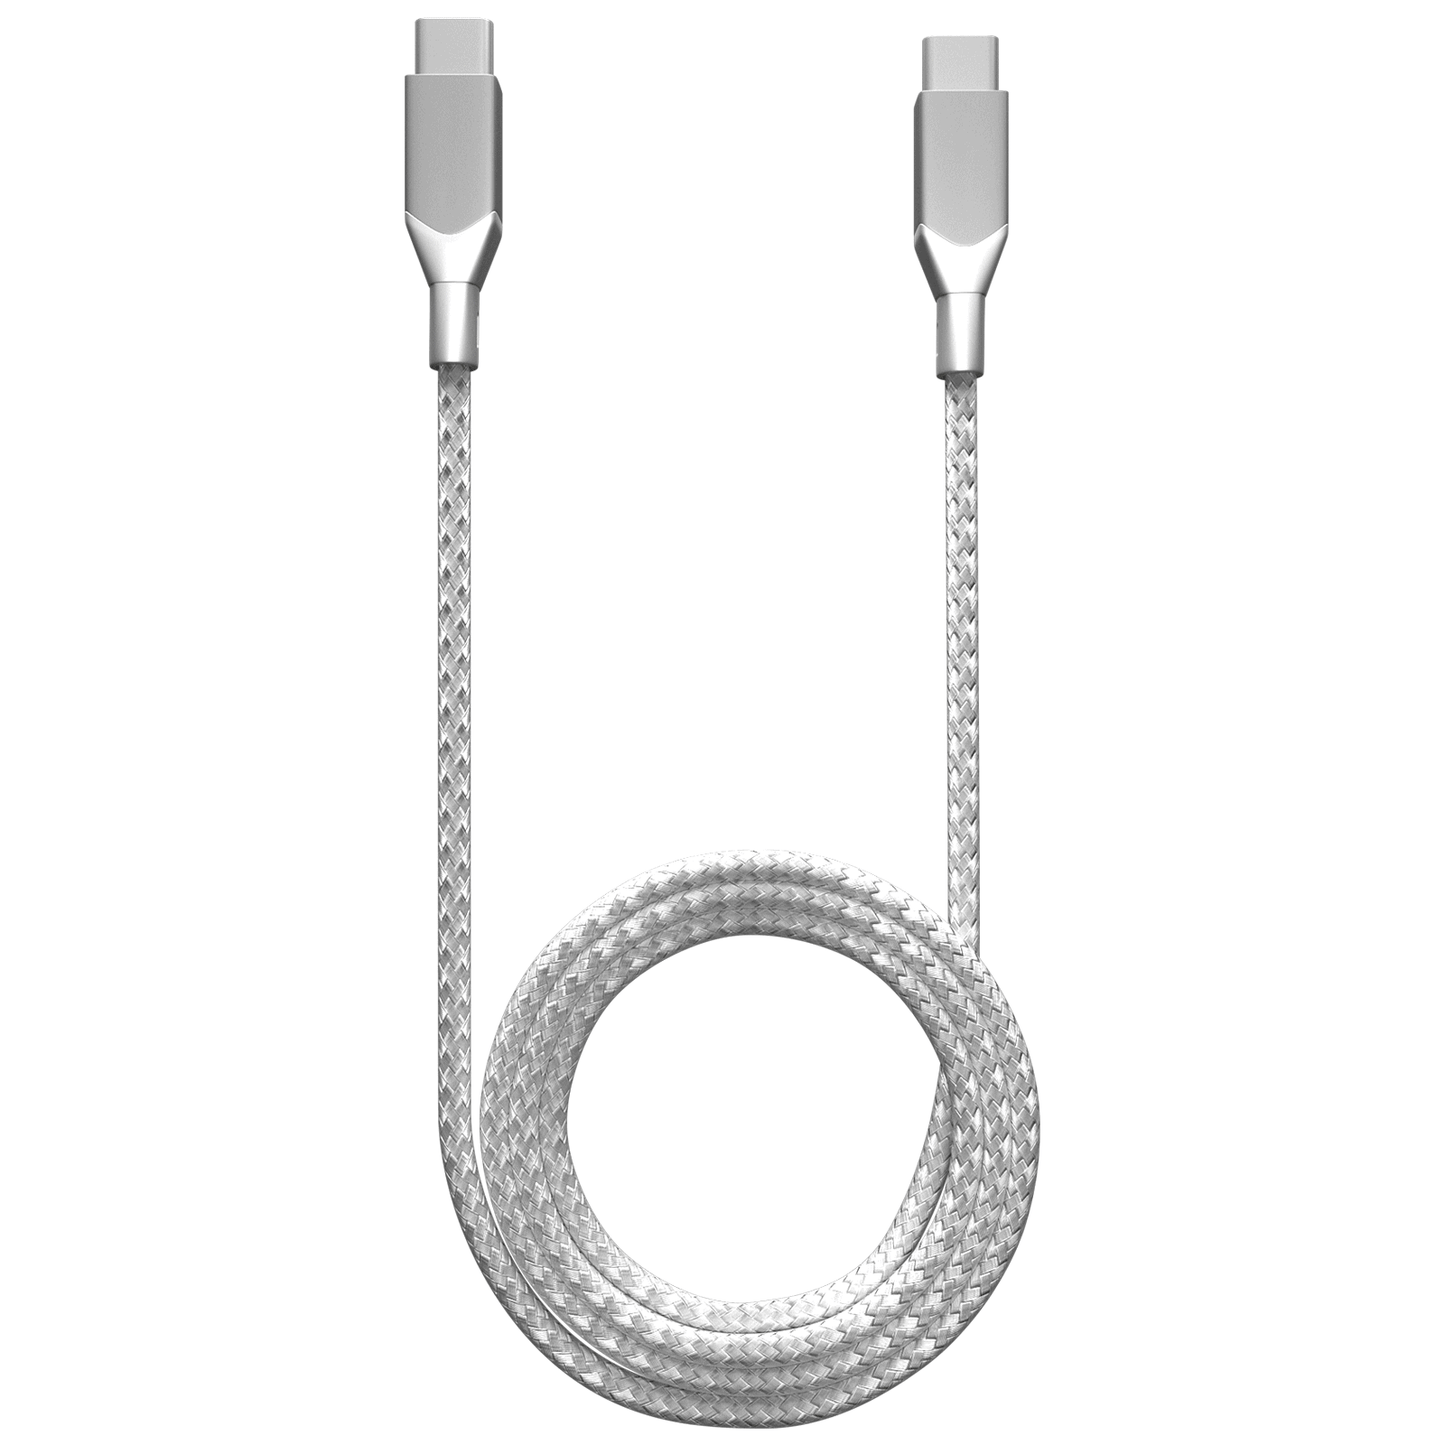 Ampsentrix USB-C to USB-C Charge and Sync Cable